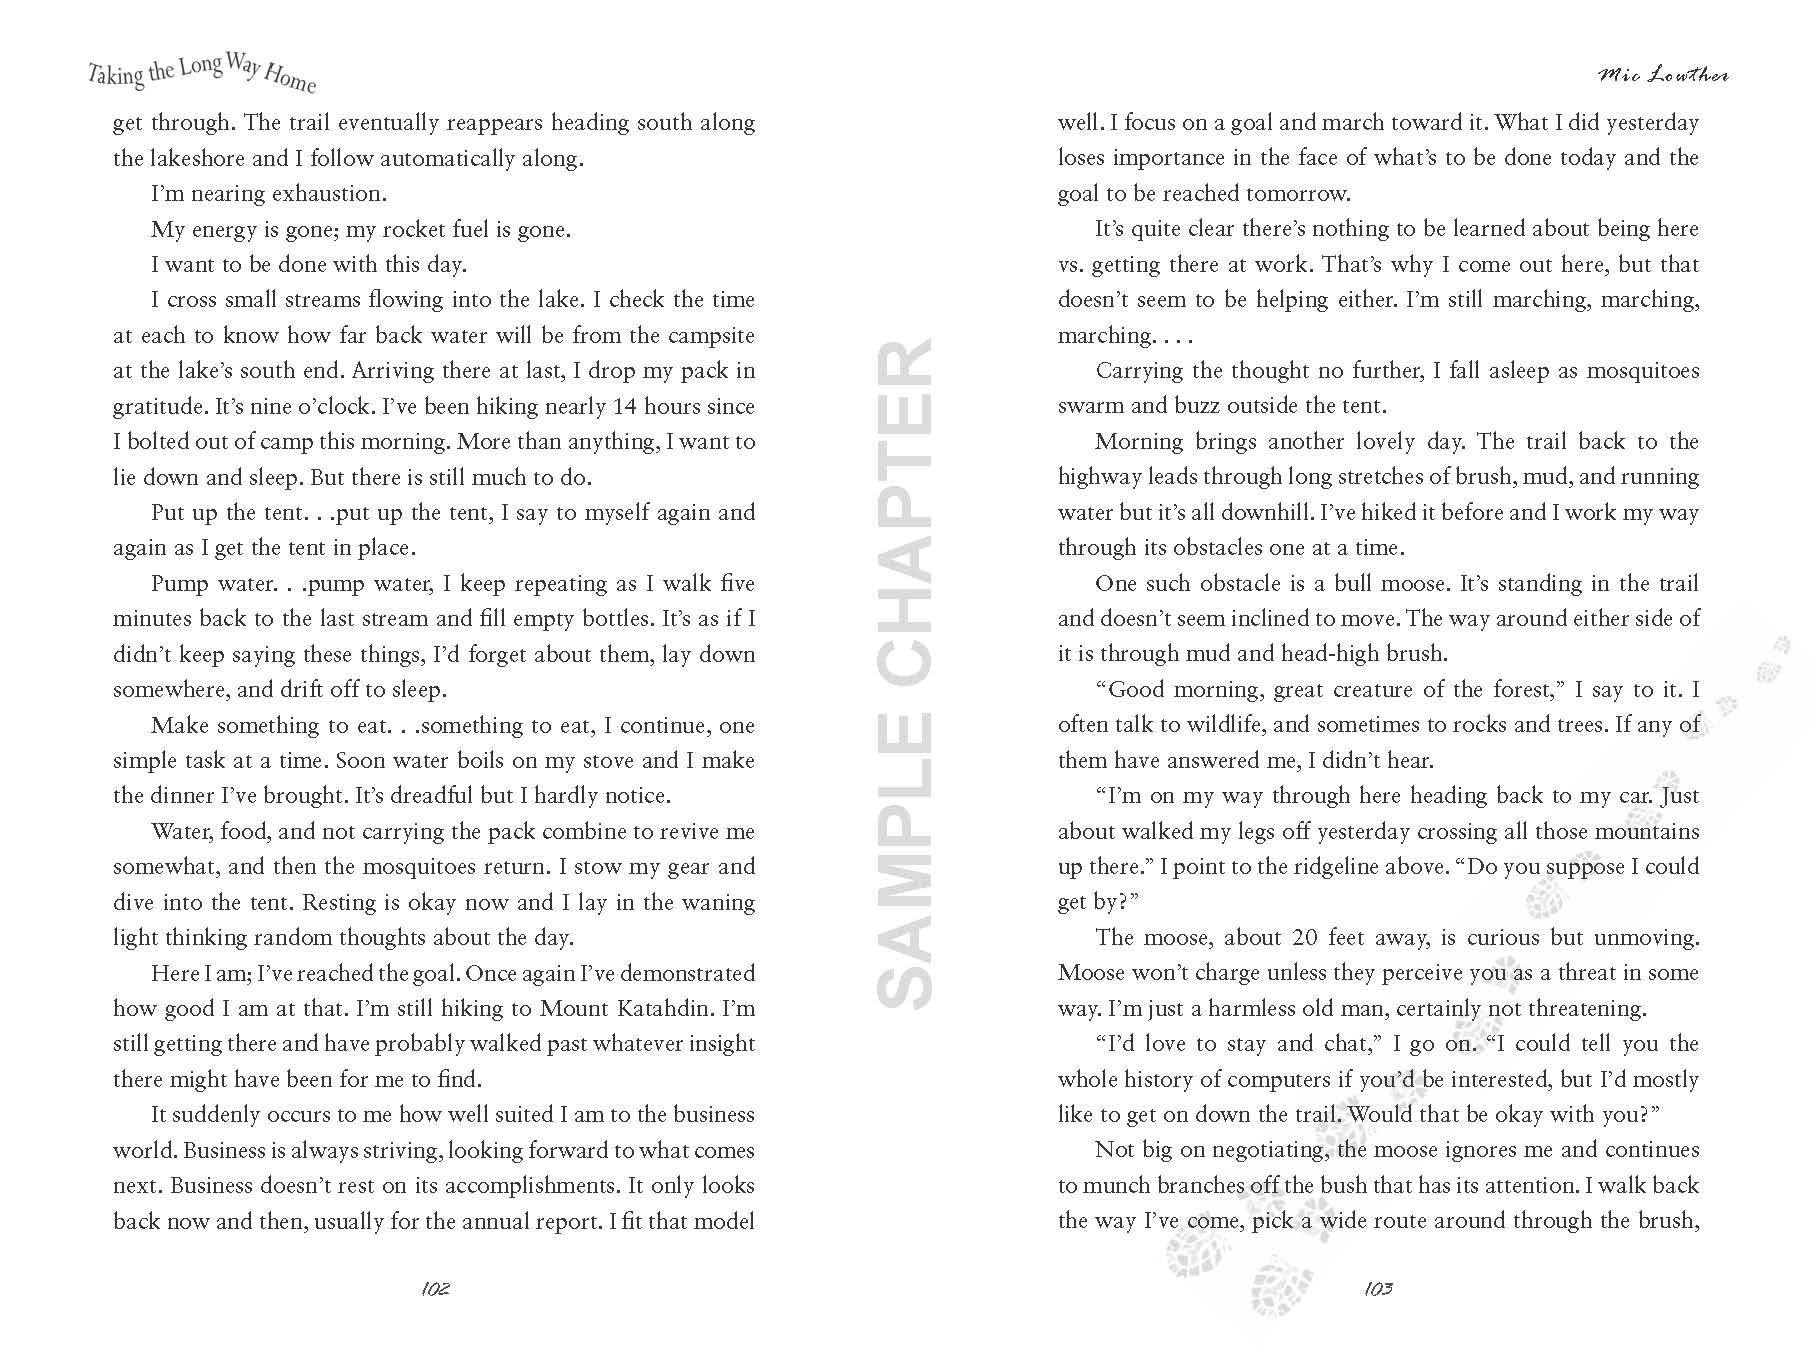 Taking The Long Way Home sample chapter pg 13 & 14